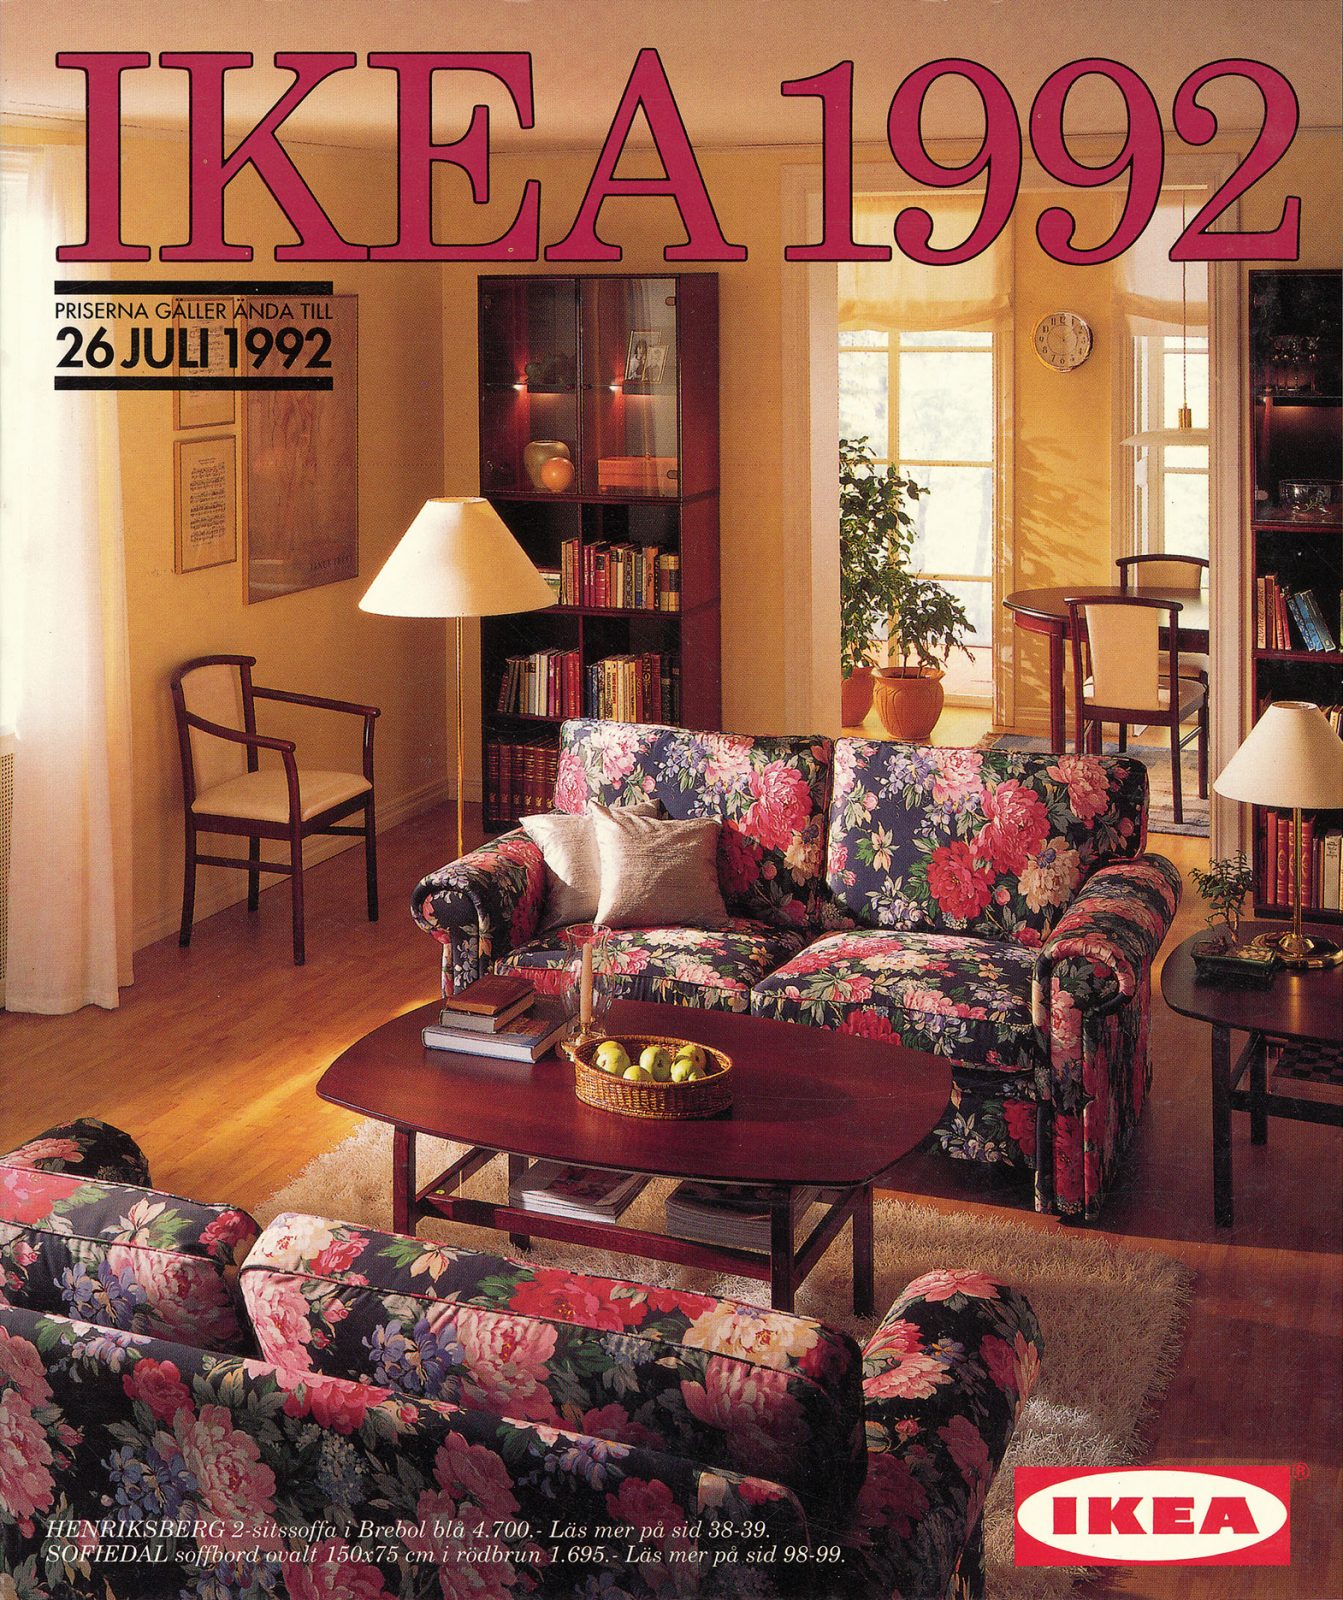 IKEA catalogue cover from 1992 with dark wooden furniture, floral patterned sofas and brass details.